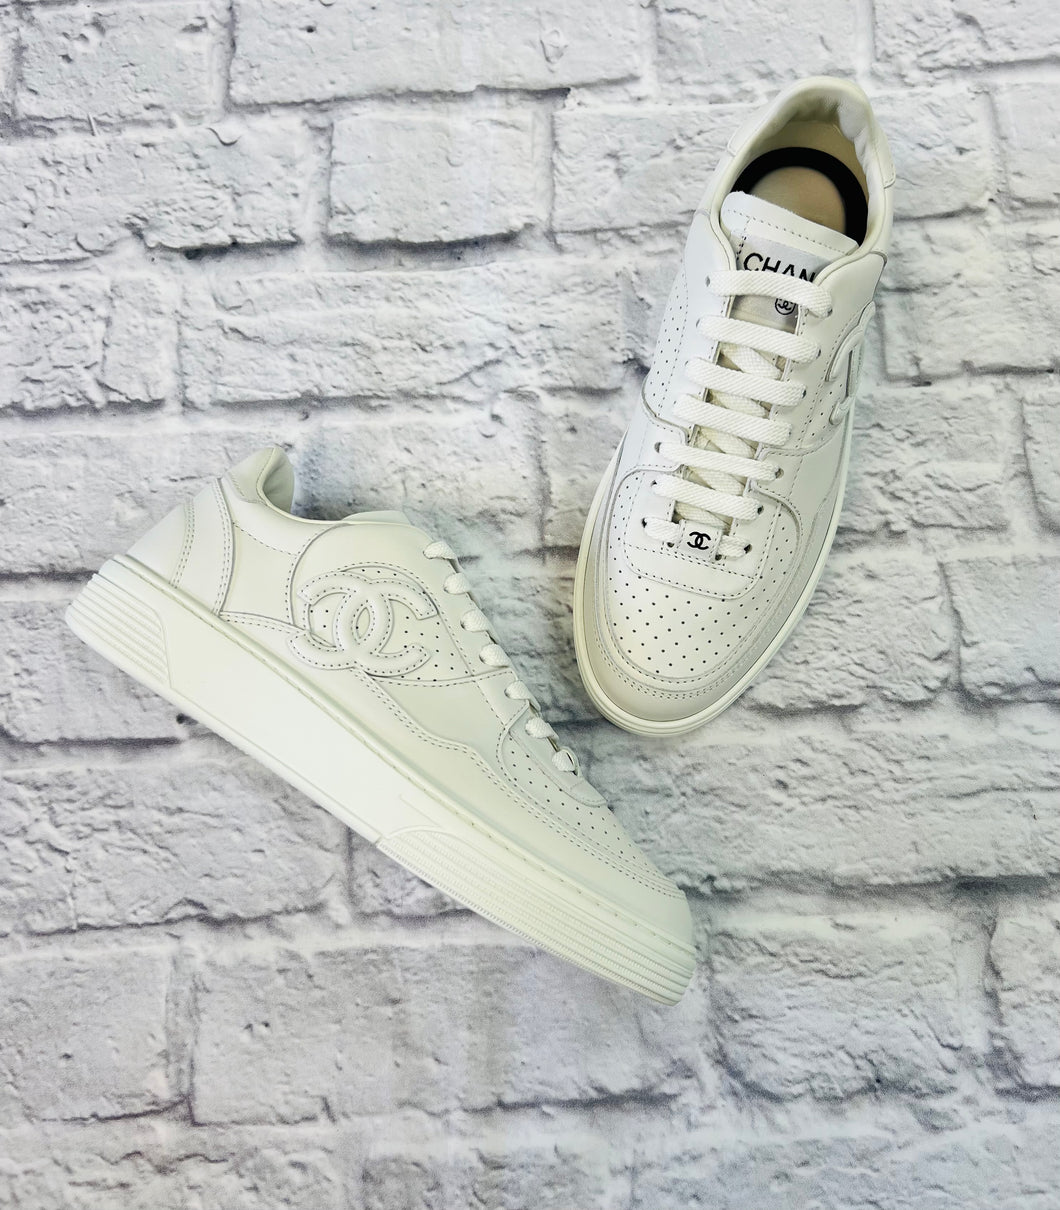 Chanel Low Top Sneakers, Size 37.5